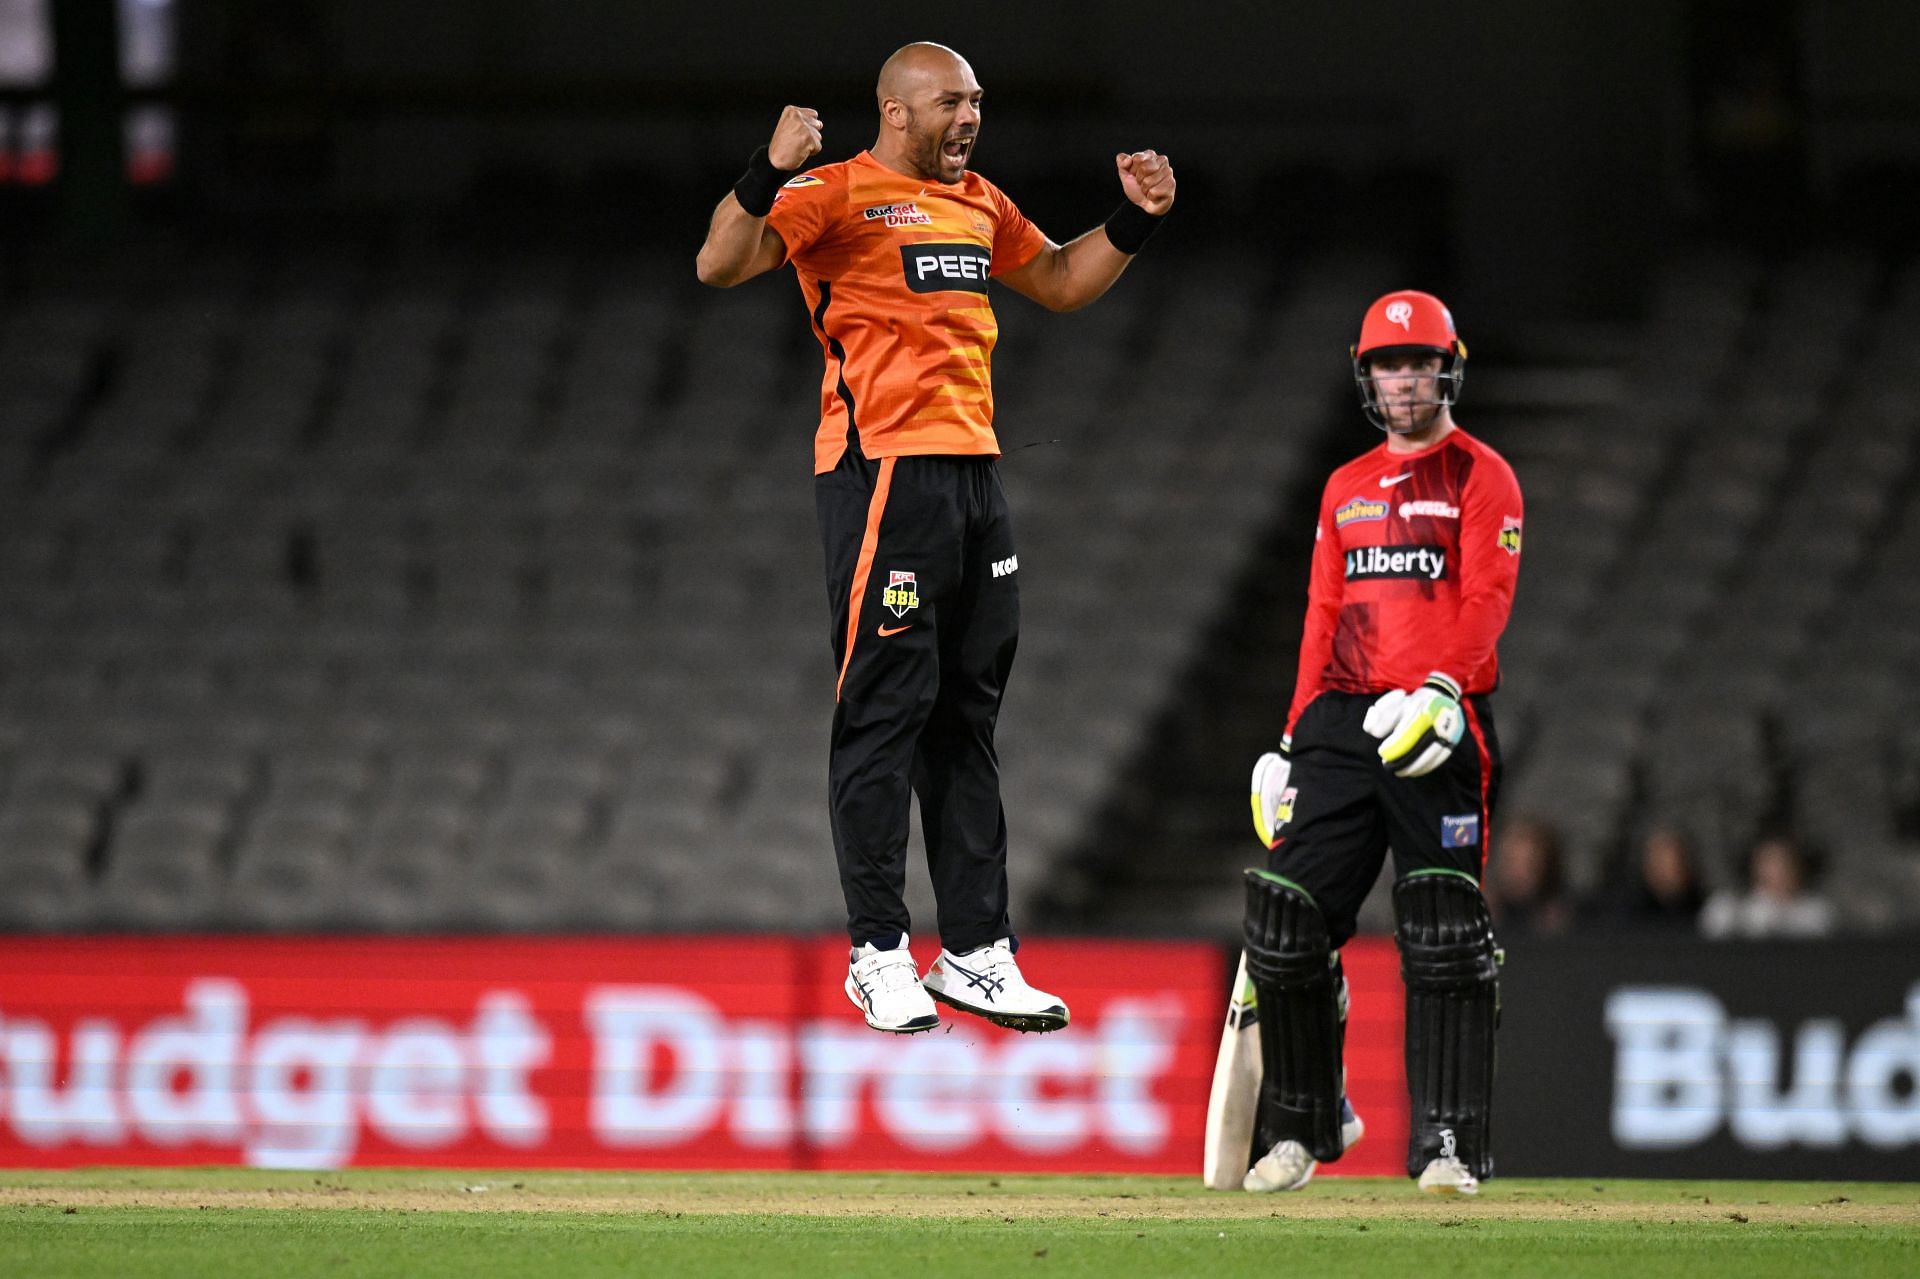 Tymal Mills has played in a number of T20 leagues around the world. [Pic credits: Getty]